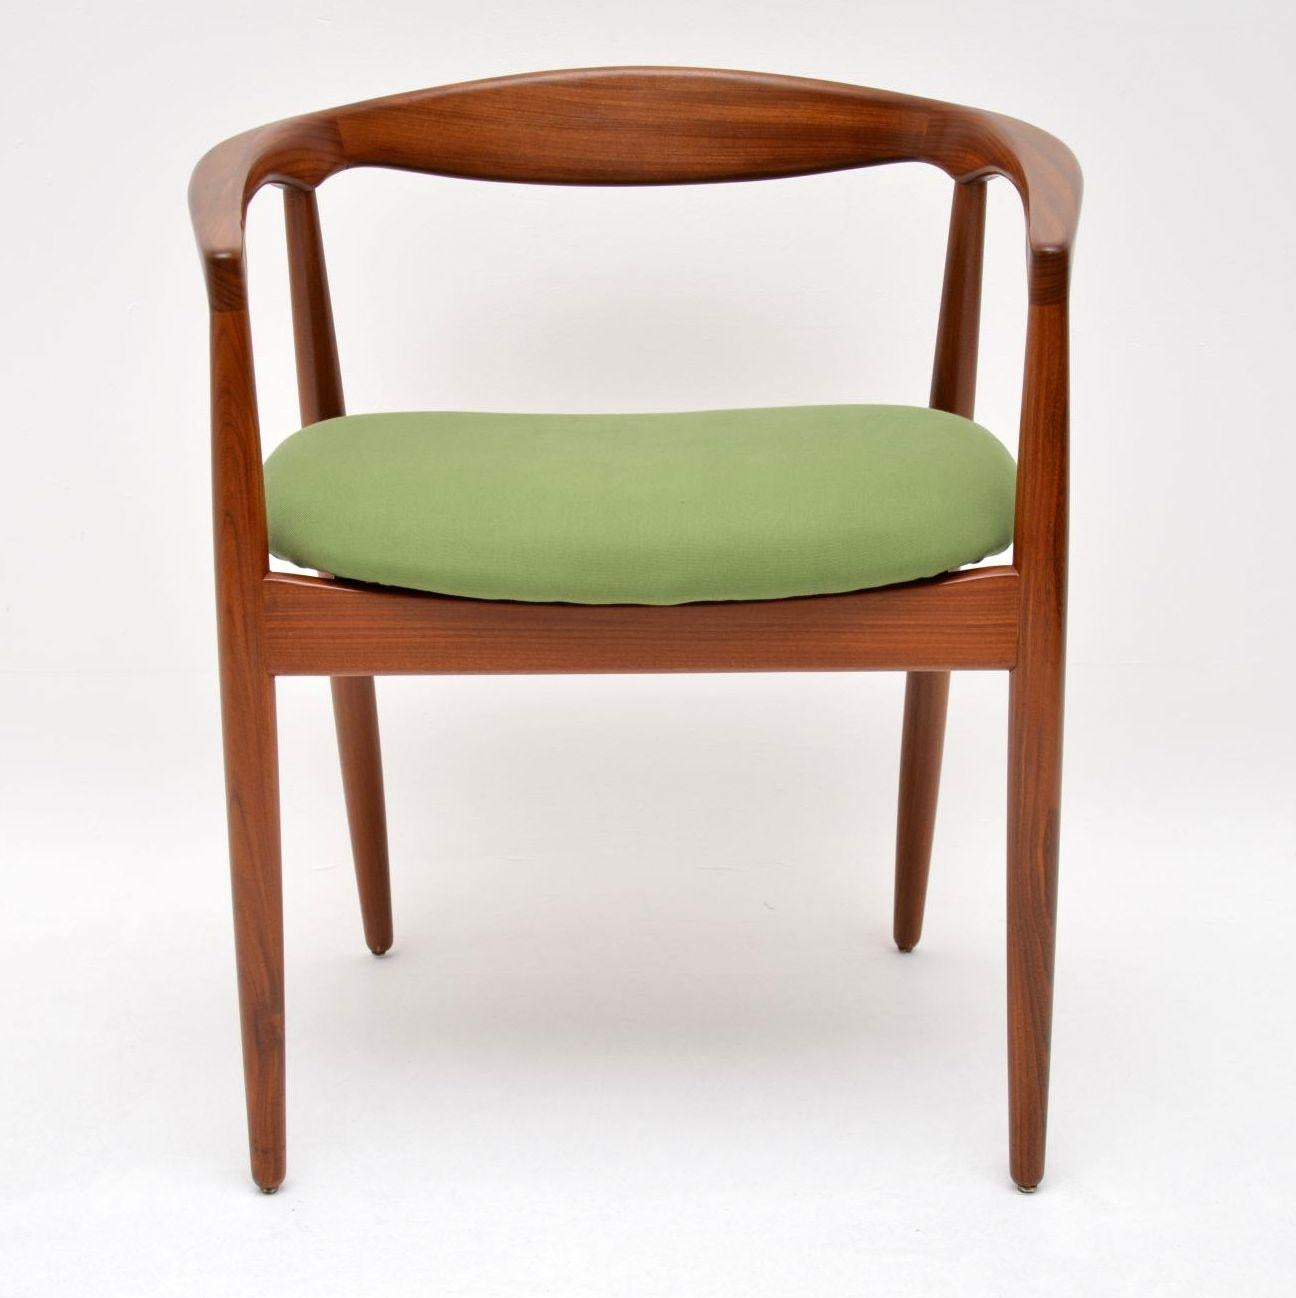 A stunning and extremely rare vintage Danish chair in solid afromosia wood; this was designed by Kai Kristiansen and it’s called the ‘Troja’ chair. The quality is incredible, and the design is simply beautiful from all angles. We have had this